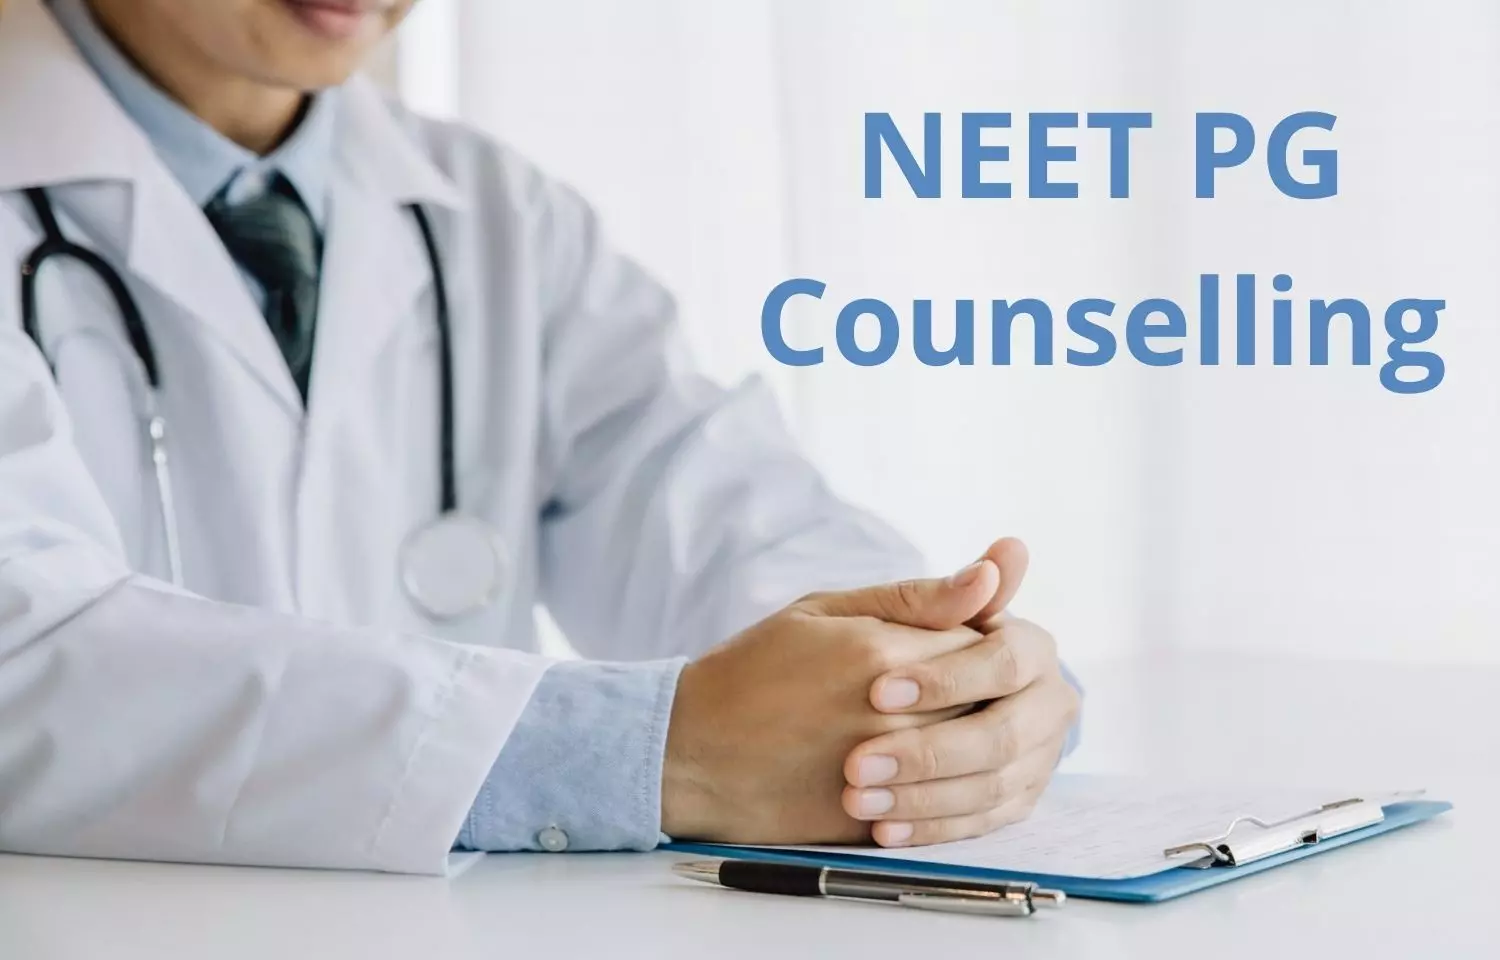 MCC releases NEET PG Counselling Information Brochure: Check eligibility, registration details here